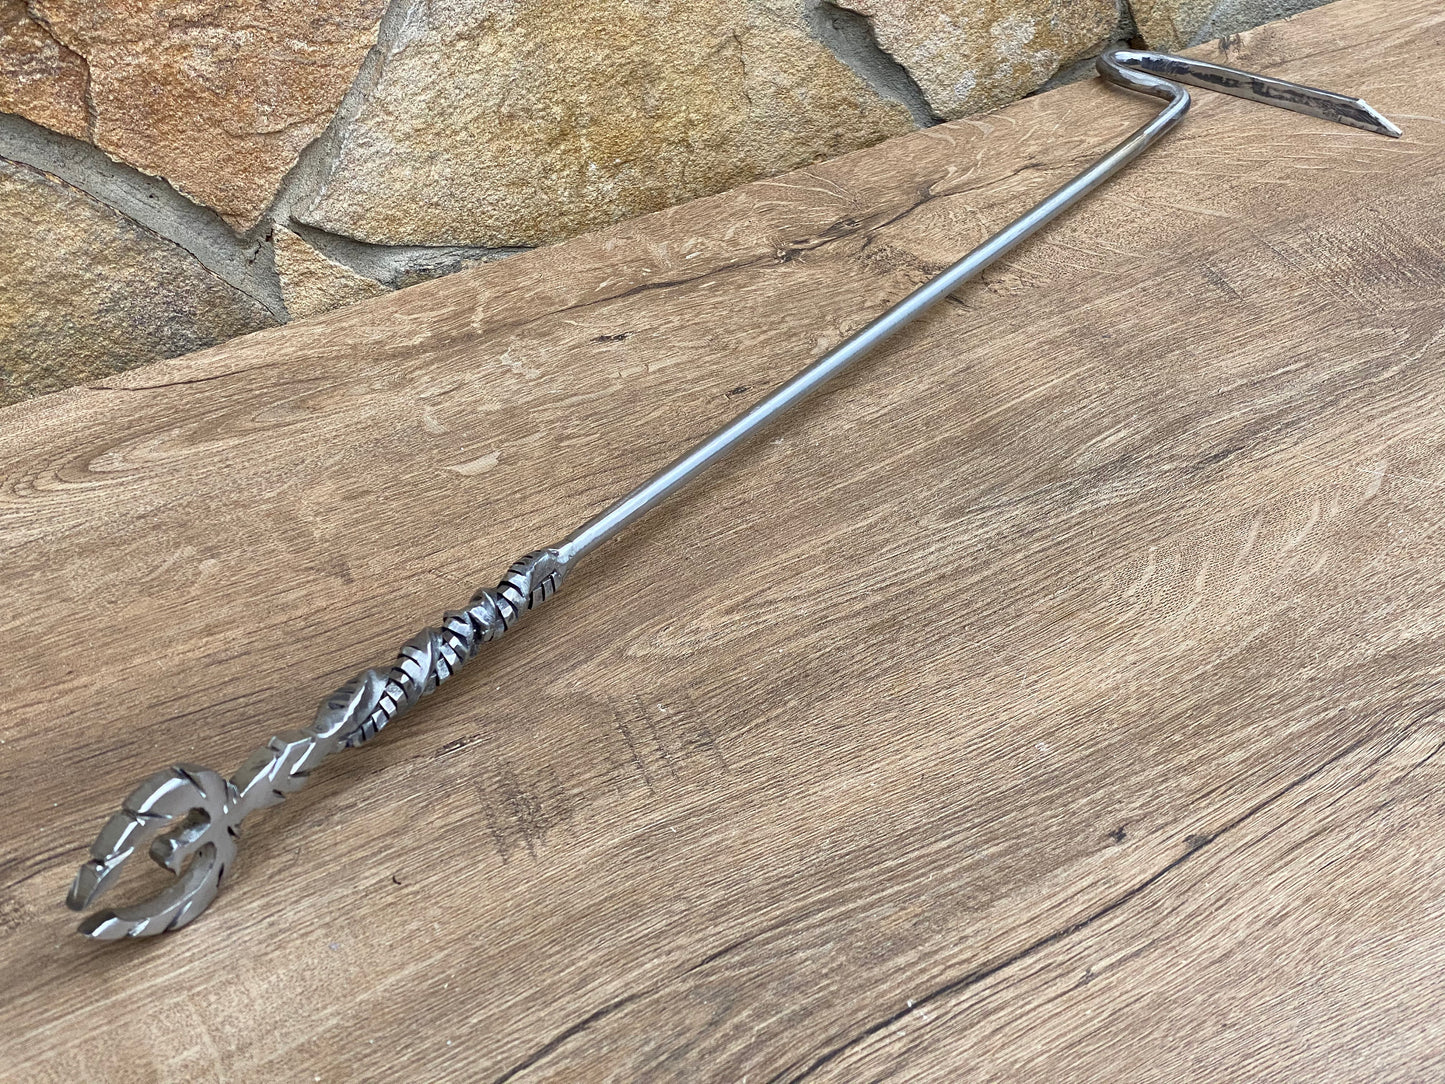 Stainless steel fire poker, phoenix, birthday, fireplace poker, Christmas, fire poker, BBQ, fireplace tool, Fathers day, fire pit,steel gift